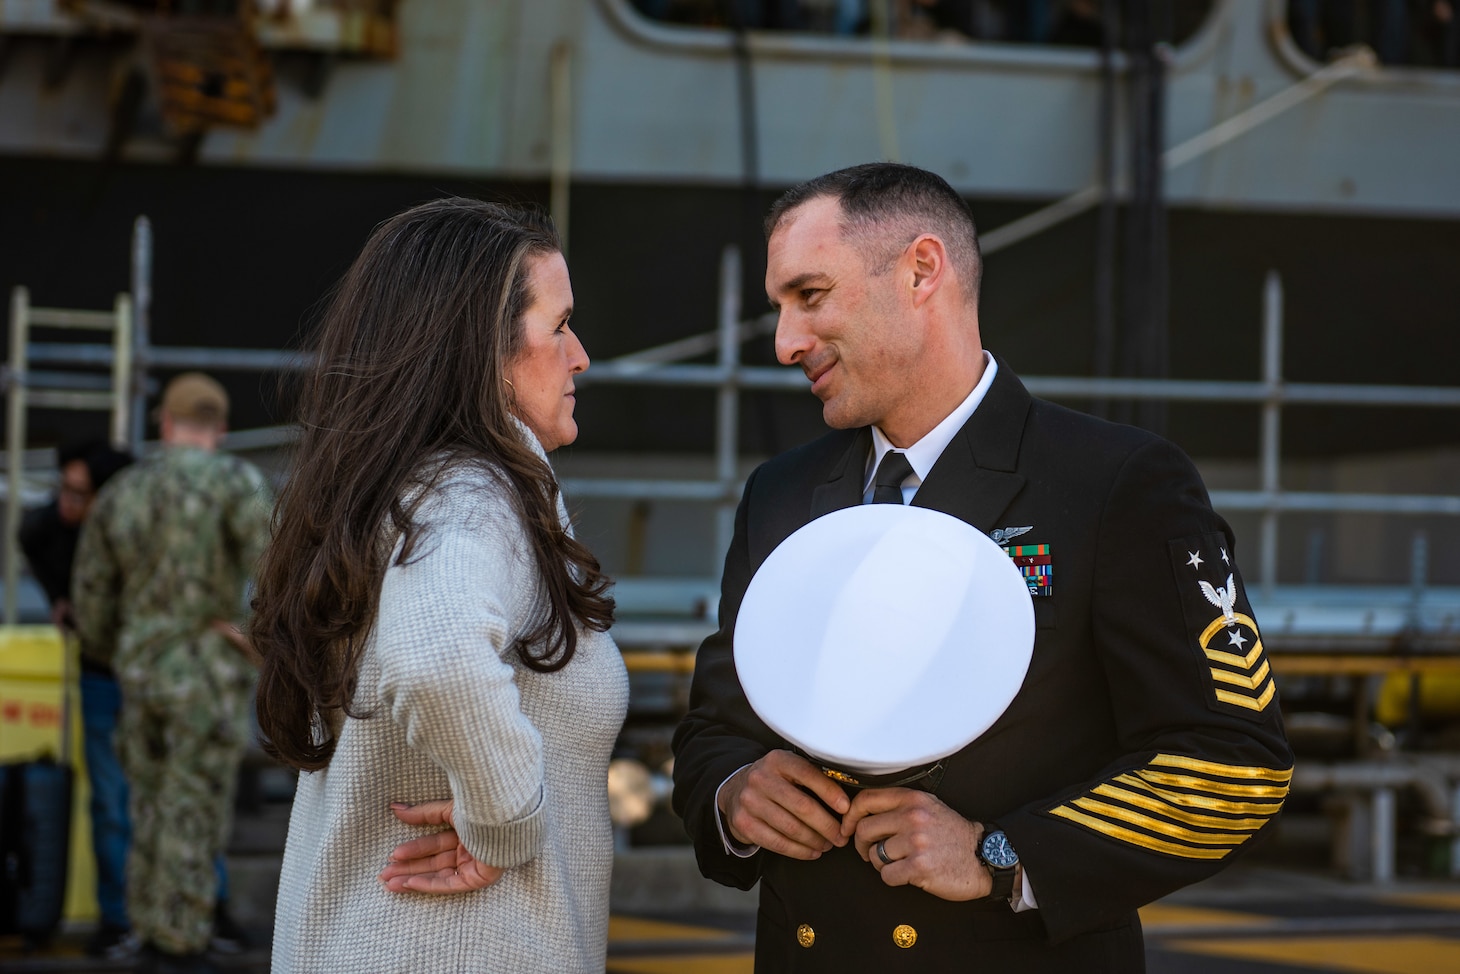 YOKOSUKA, Japan (Nov. 19, 2023) Command Master Chief Jeremy Douglas, command master chief of the U.S. Navy’s only forward-deployed aircraft carrier, USS Ronald Reagan (CVN 76), speaks with his wife on the pier as the ship returns to Commander, Fleet Activities Yokosuka, Japan, following a six-month deployment in the Indo-Pacific region, Nov. 19. During Ronald Reagan’s deployment, the ship conducted multinational exercises with the Japan Maritime Self-Defense Force (JMSDF), Royal Australian Navy, Indonesian Navy, and Republic of Korea Navy, a multi-large deck event with USS Carl Vinson (CVN 70), Carrier Strike Group 1, and JMSDF first-in-class helicopter destroyer JS Hyuga (DDH 181), and visited Vietnam, Republic of Korea, and the Philippines. Ronald Reagan, the flagship of Carrier Strike Group 5, provides a combat-ready force that protects and defends the United States, and supports alliances, partnerships and collective maritime interests in the Indo-Pacific region. (U.S. Navy photo by Mass Communication Specialist 2nd Class Caroline H. Lui)